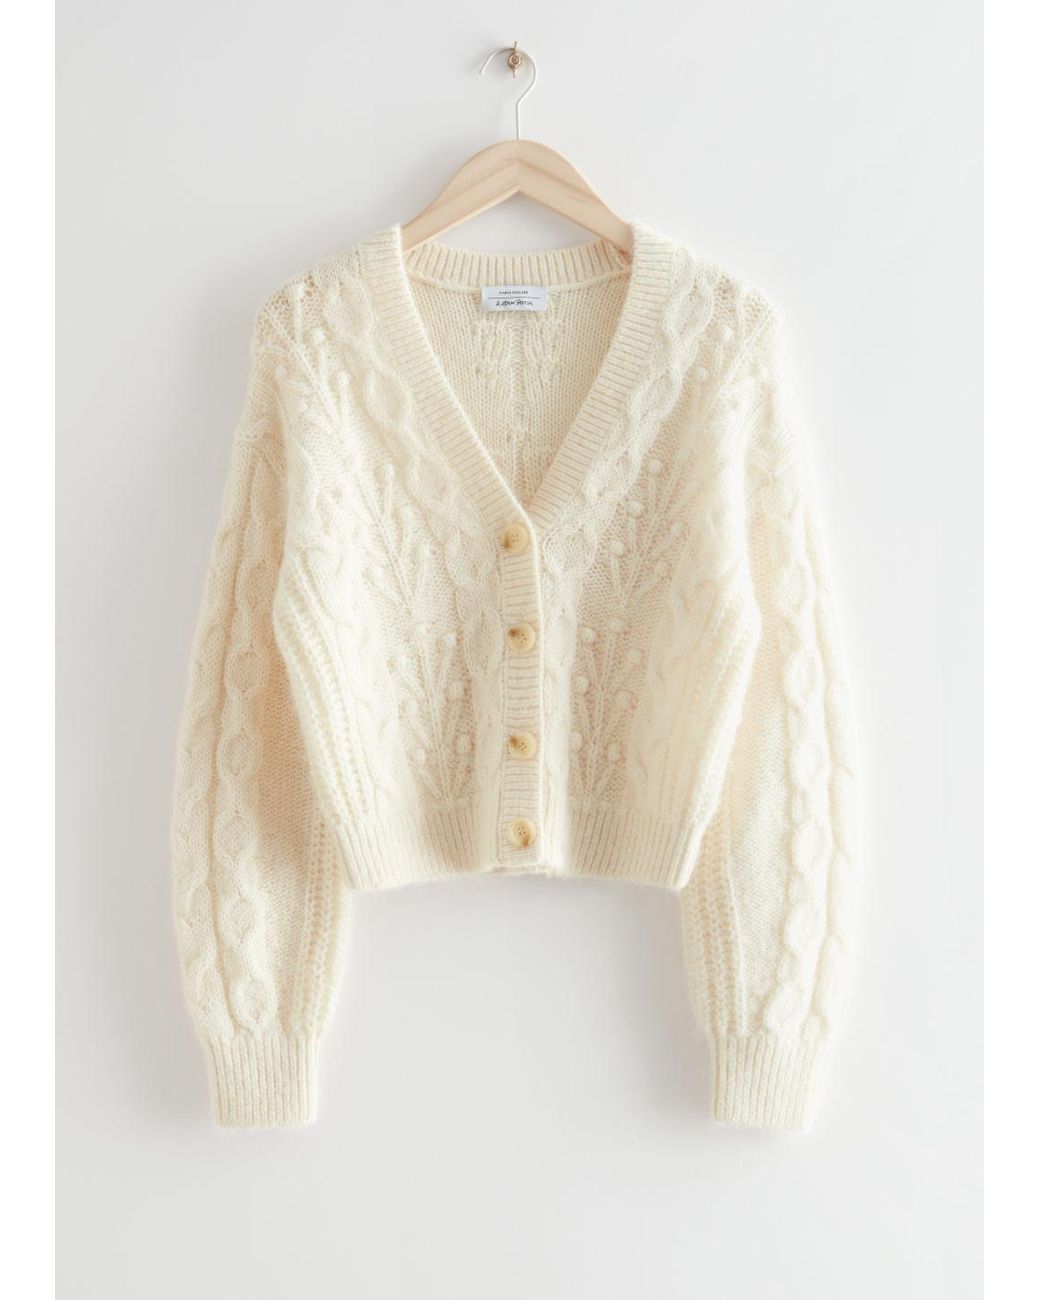 & Other Stories Cable Knit Wool Cardigan in White | Lyst